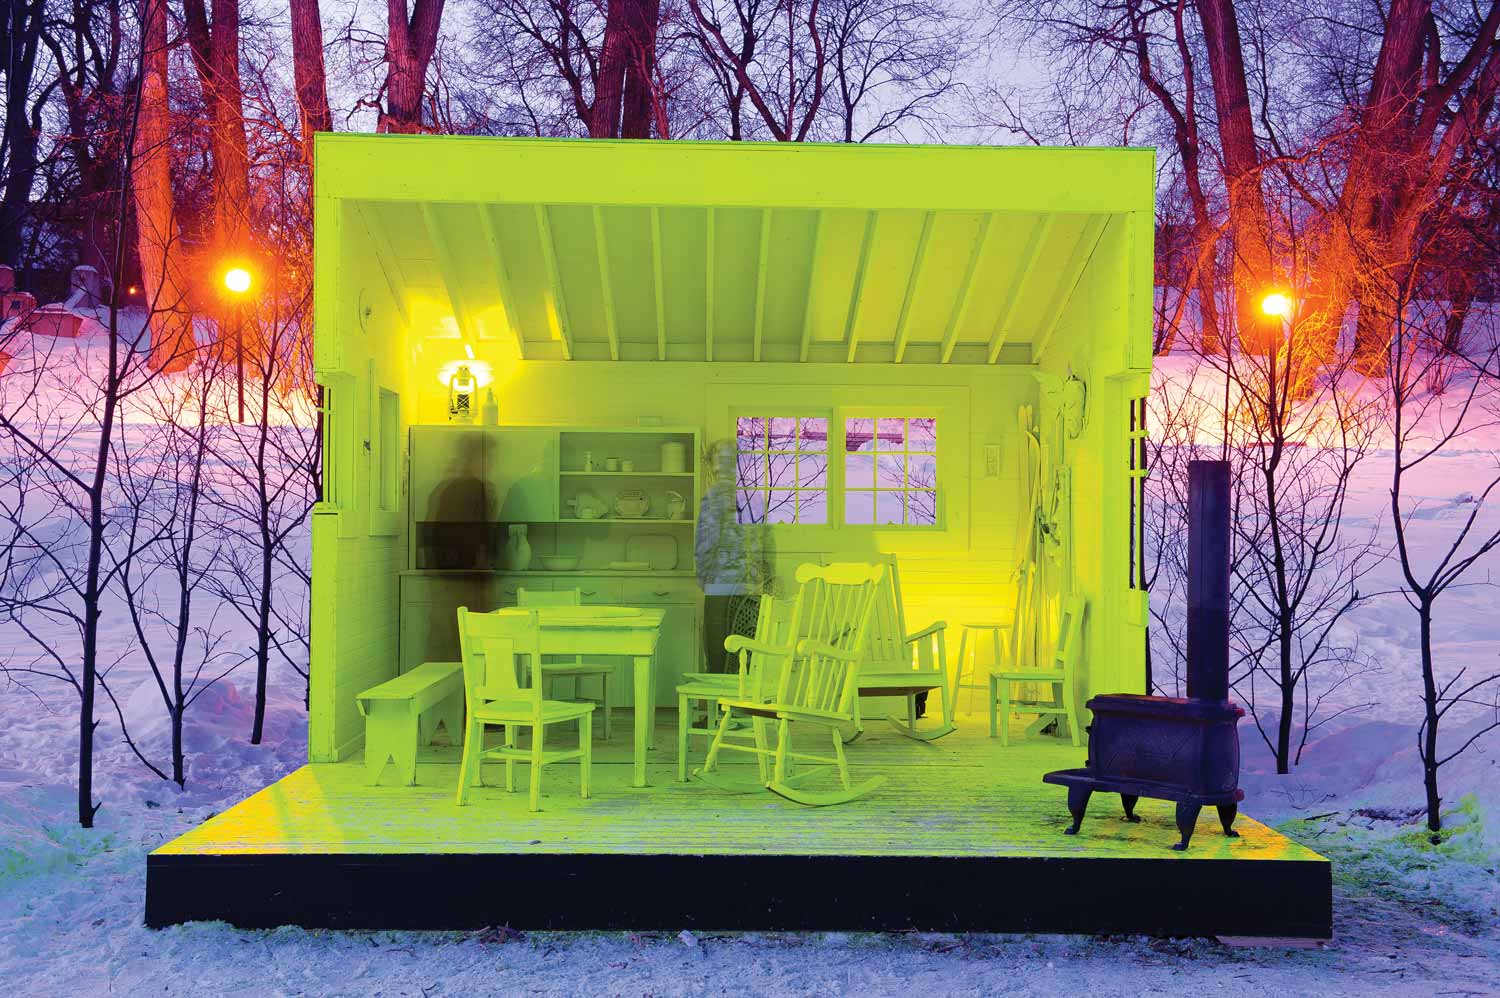 A cabin room cut in half on a base on the river. A table and chairs and other room decorations are all painted fluorescent yellow. A wood stove sits in the corner. A skater from the river trail is standing next to a bench in the warming hut